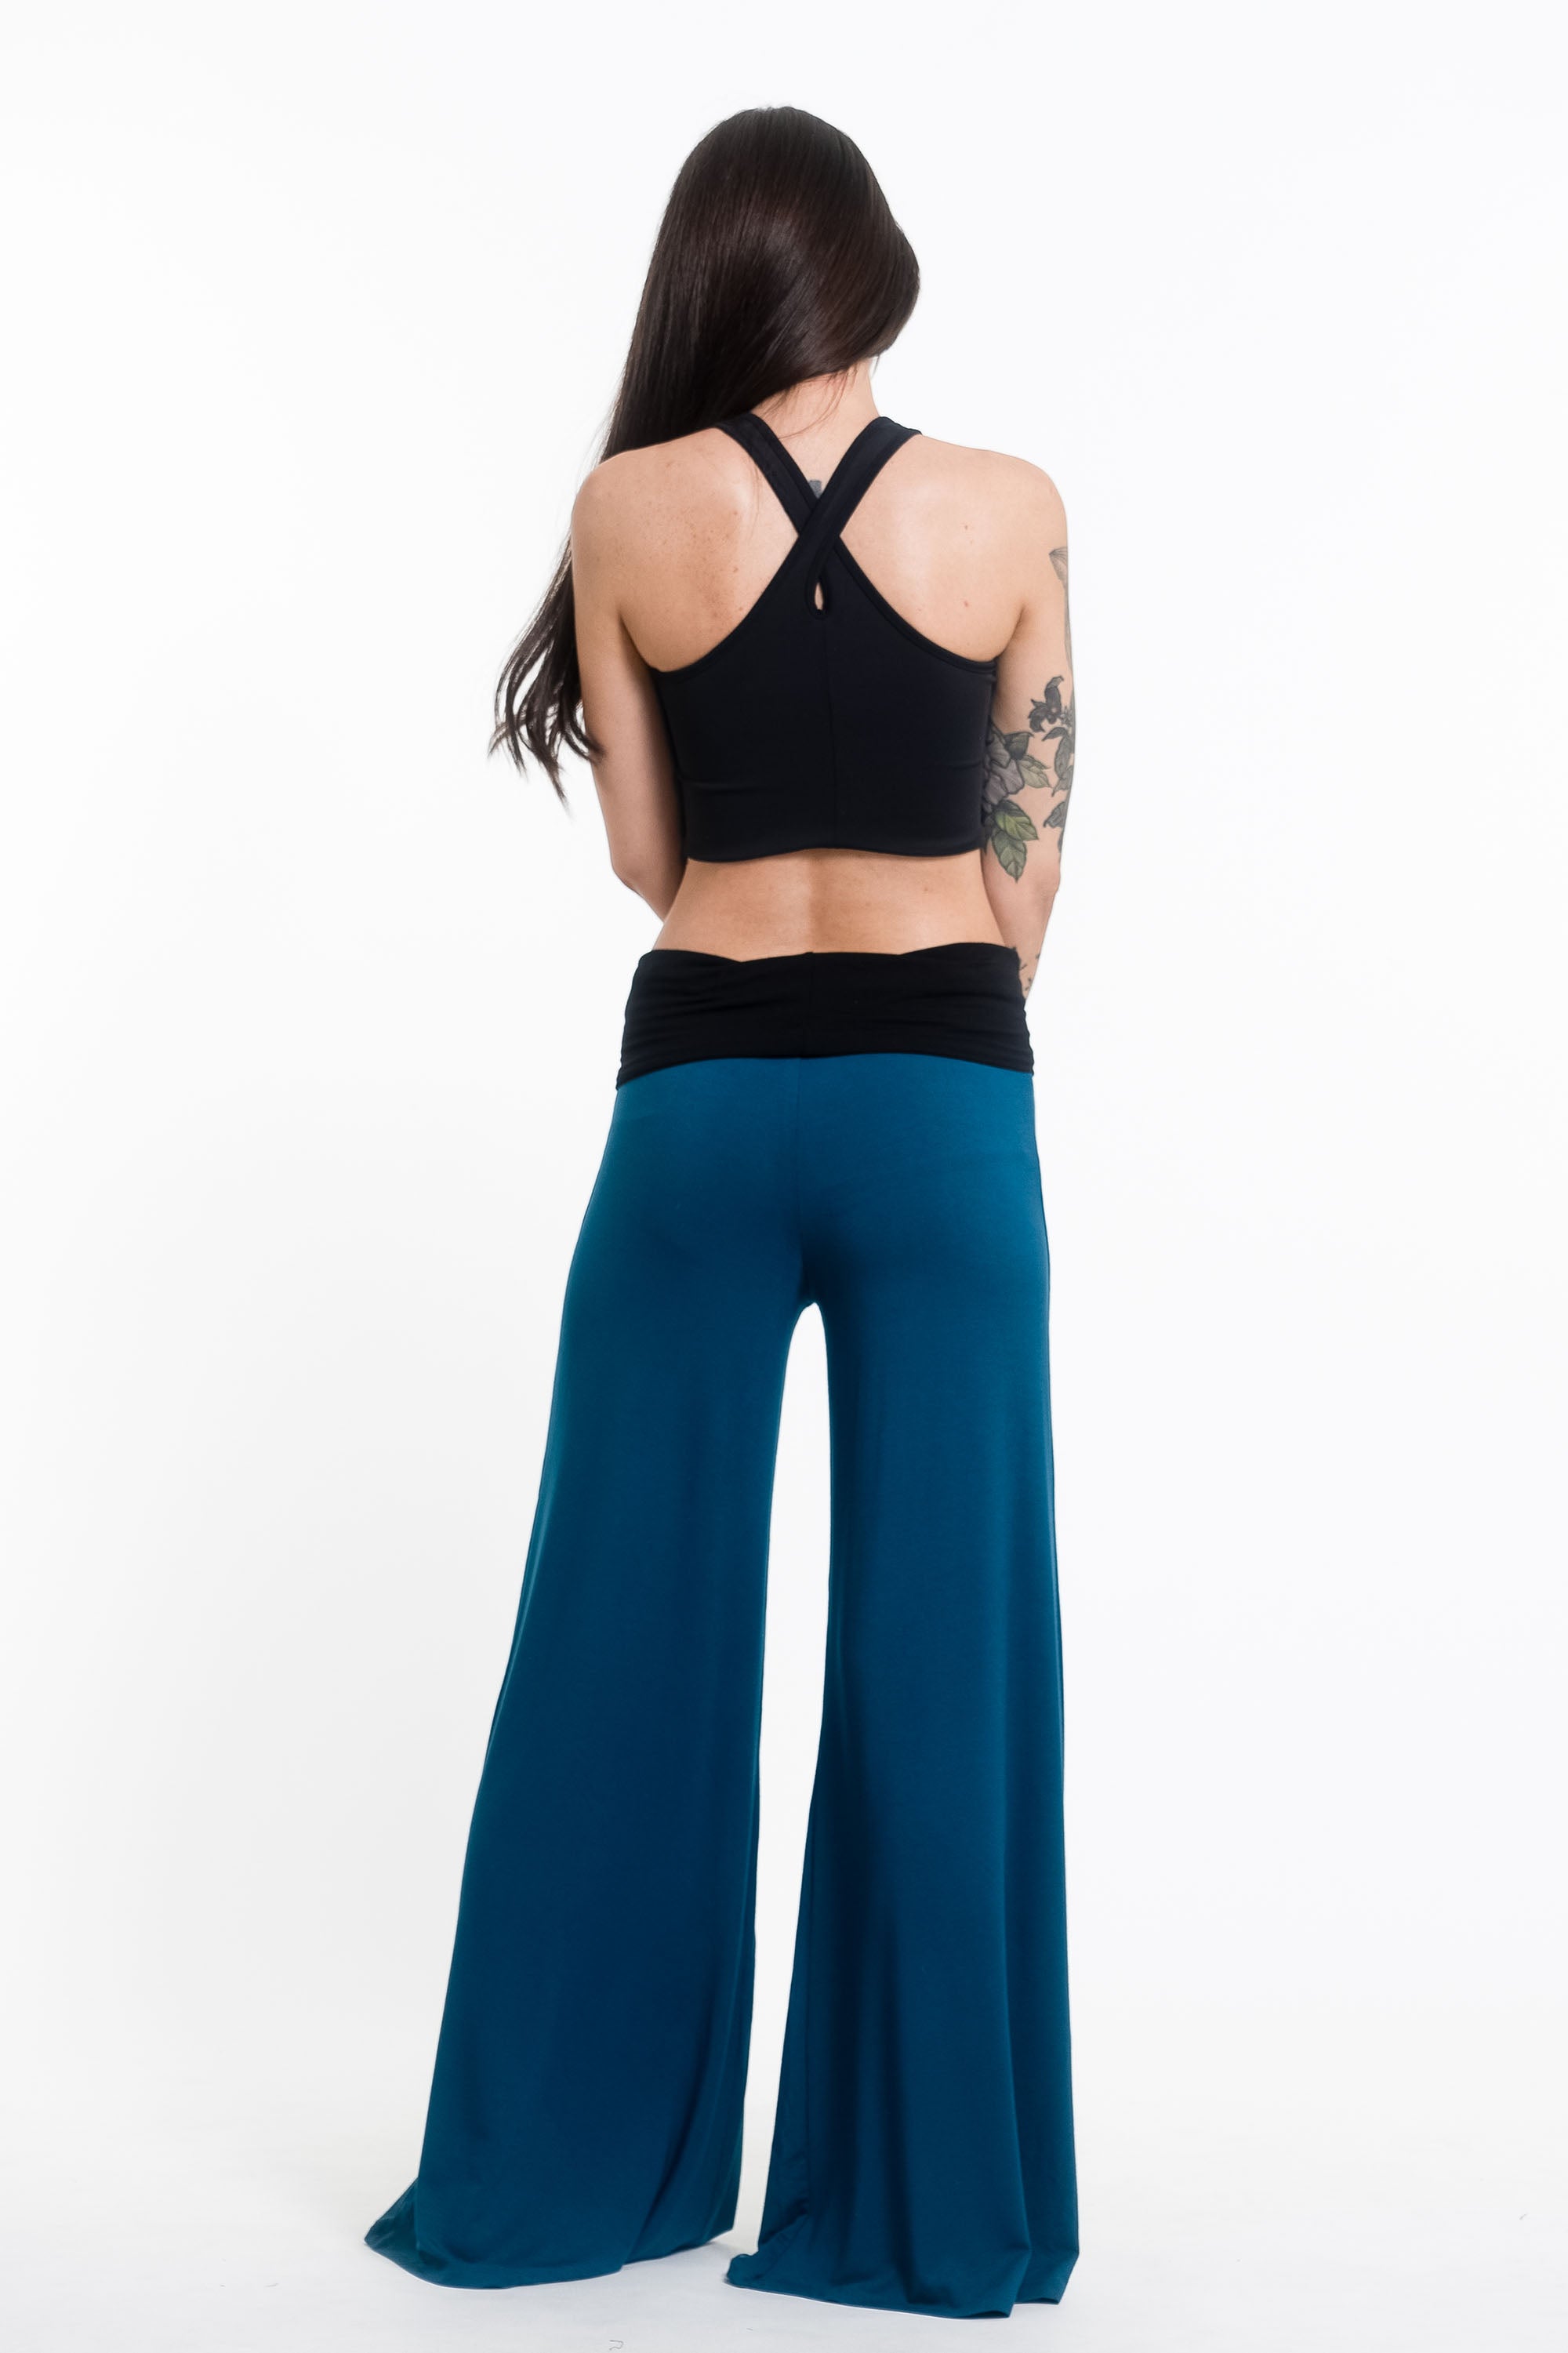 Solid Color Women's Tall Harem Pants in Black